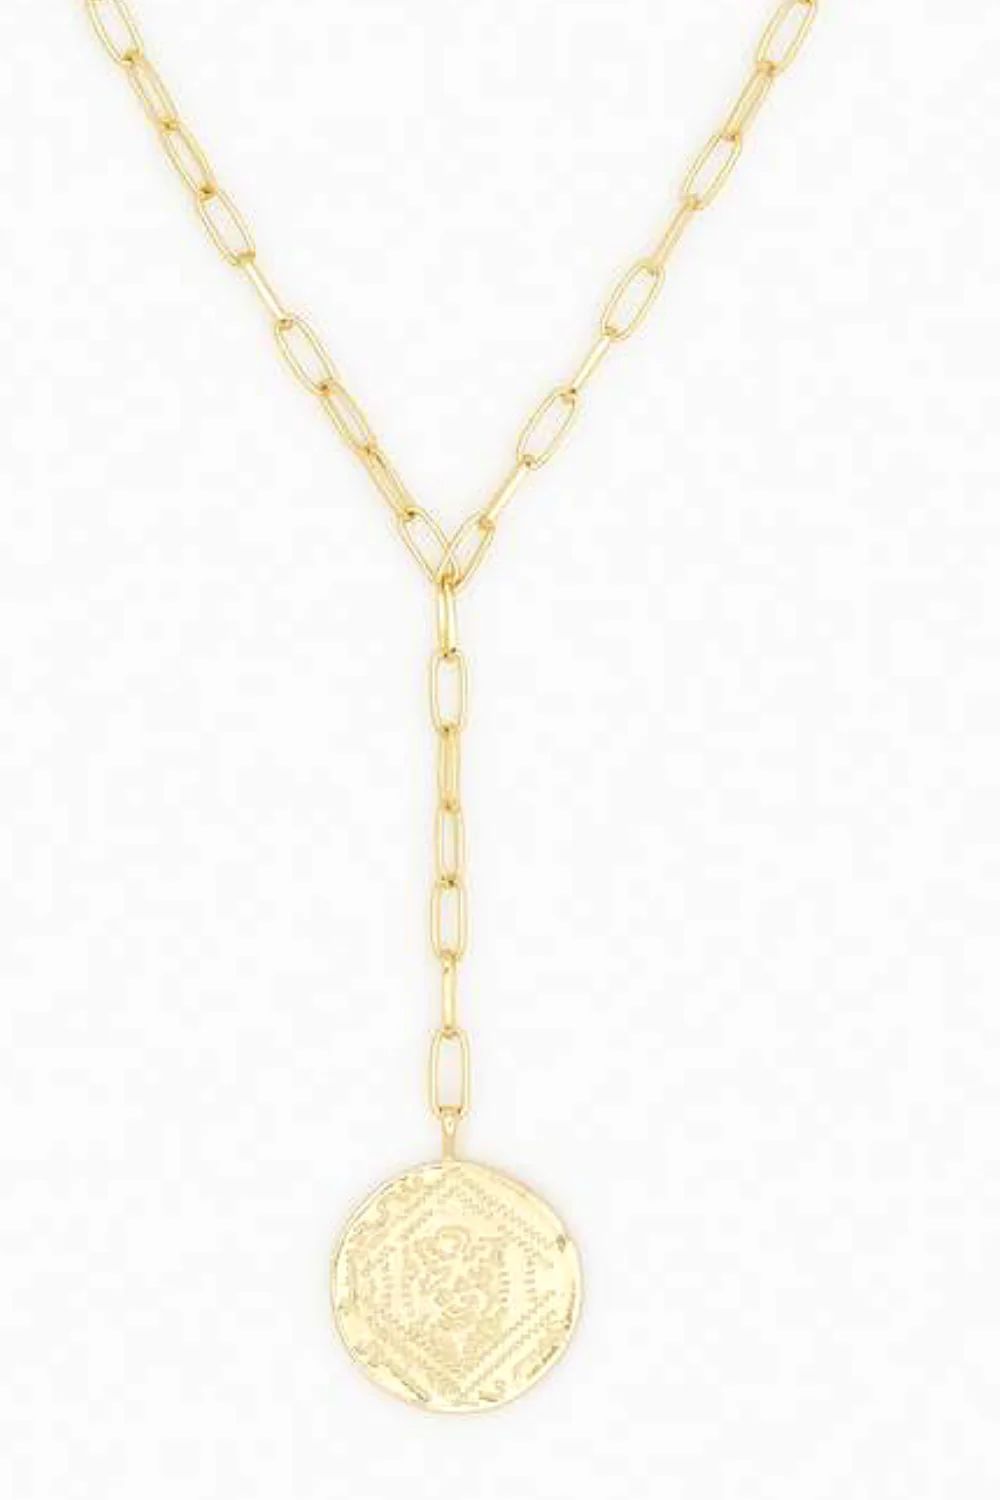 Renaissance Coin Lariat | The Styled Collection